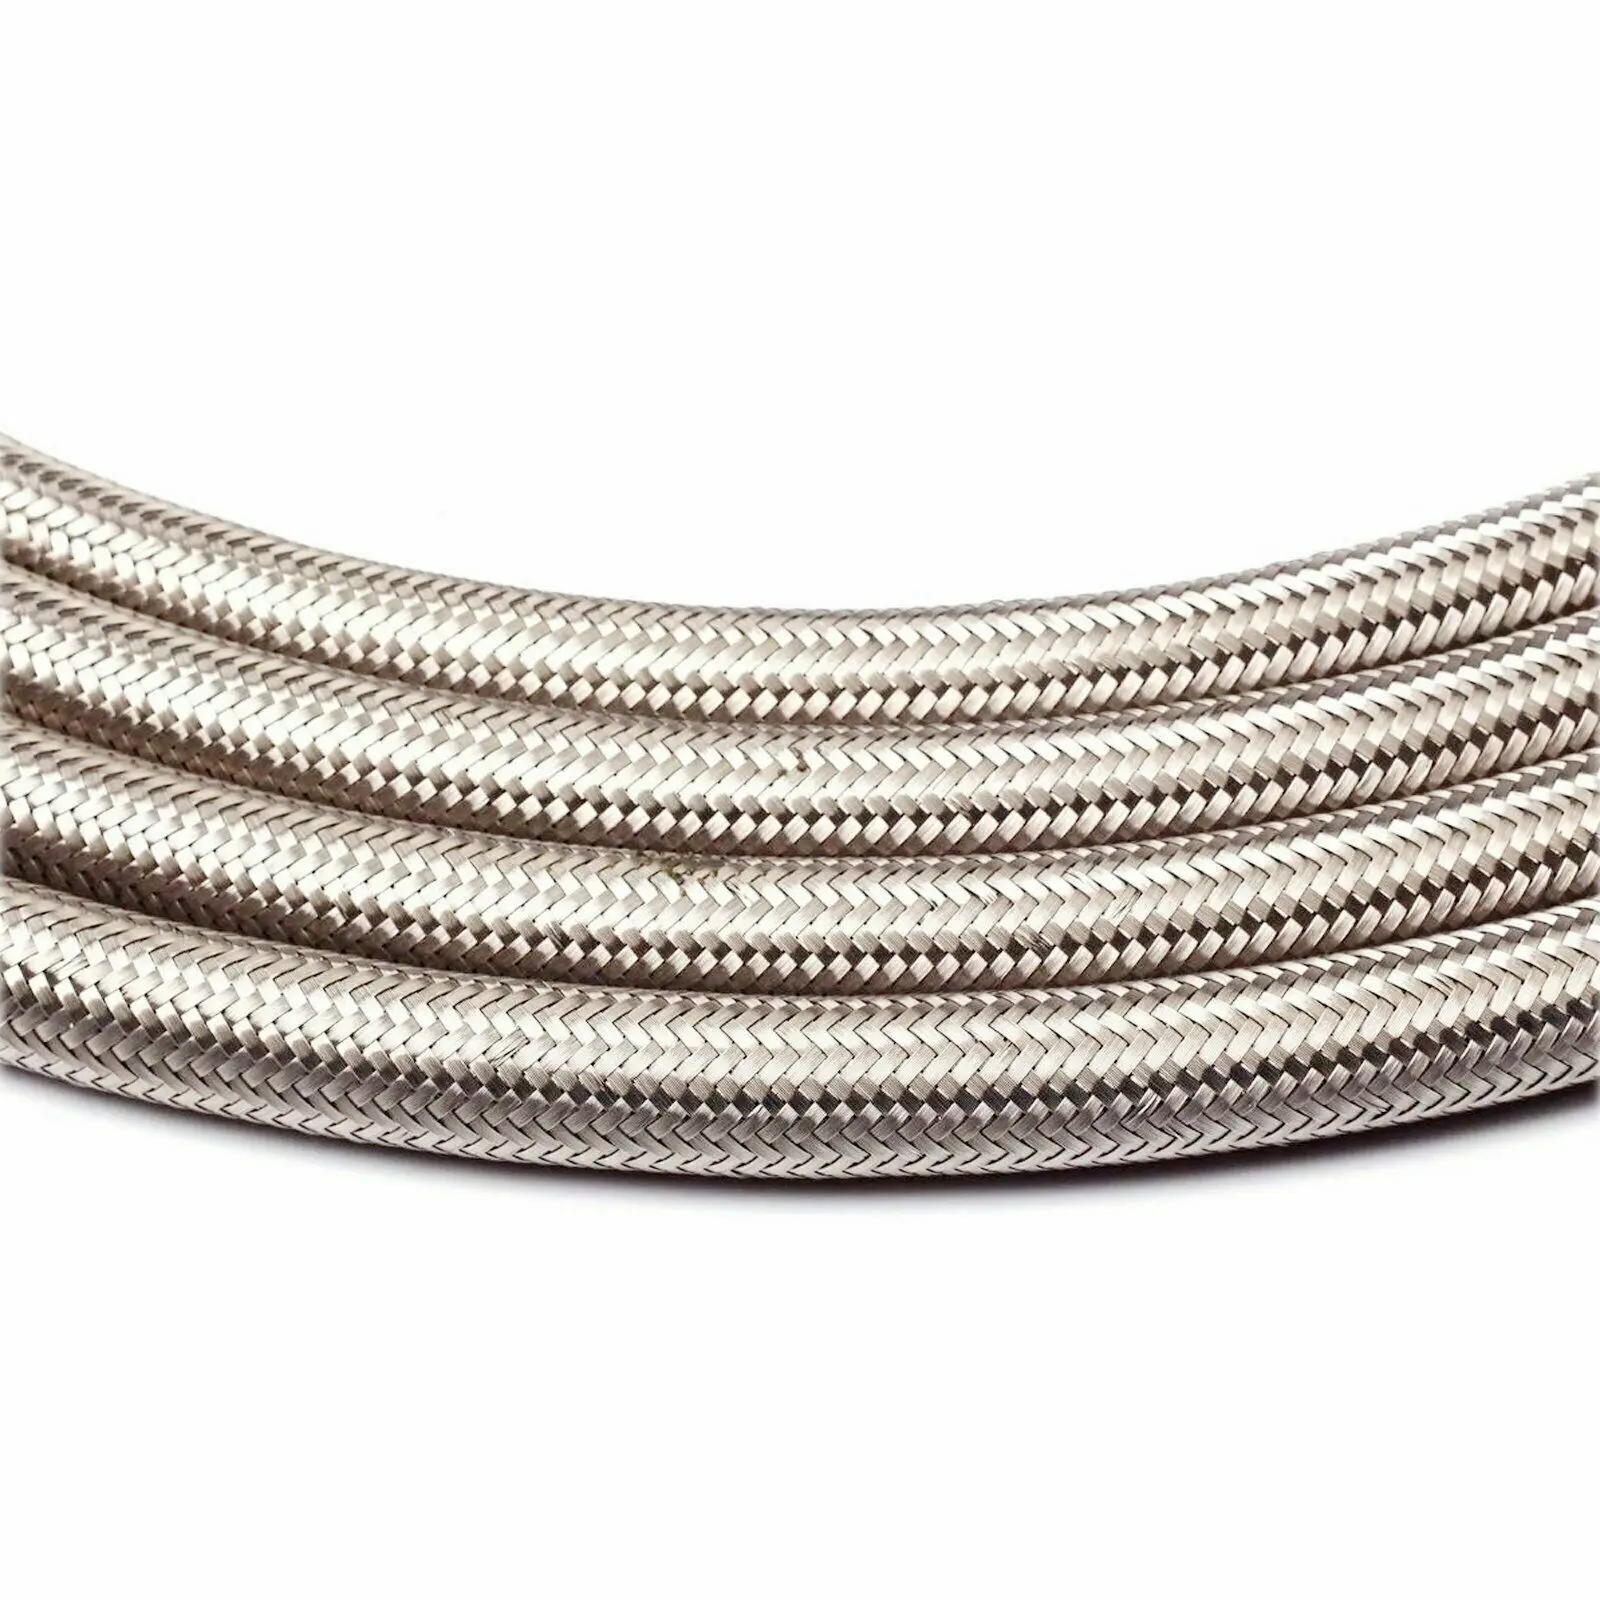 Brand New High Quality Length 4M AN10 Racing Hose 304 Stainless Steel Braided PTFE Brake Hose Fuel Oil Line Oil Cooler Hose Pipe